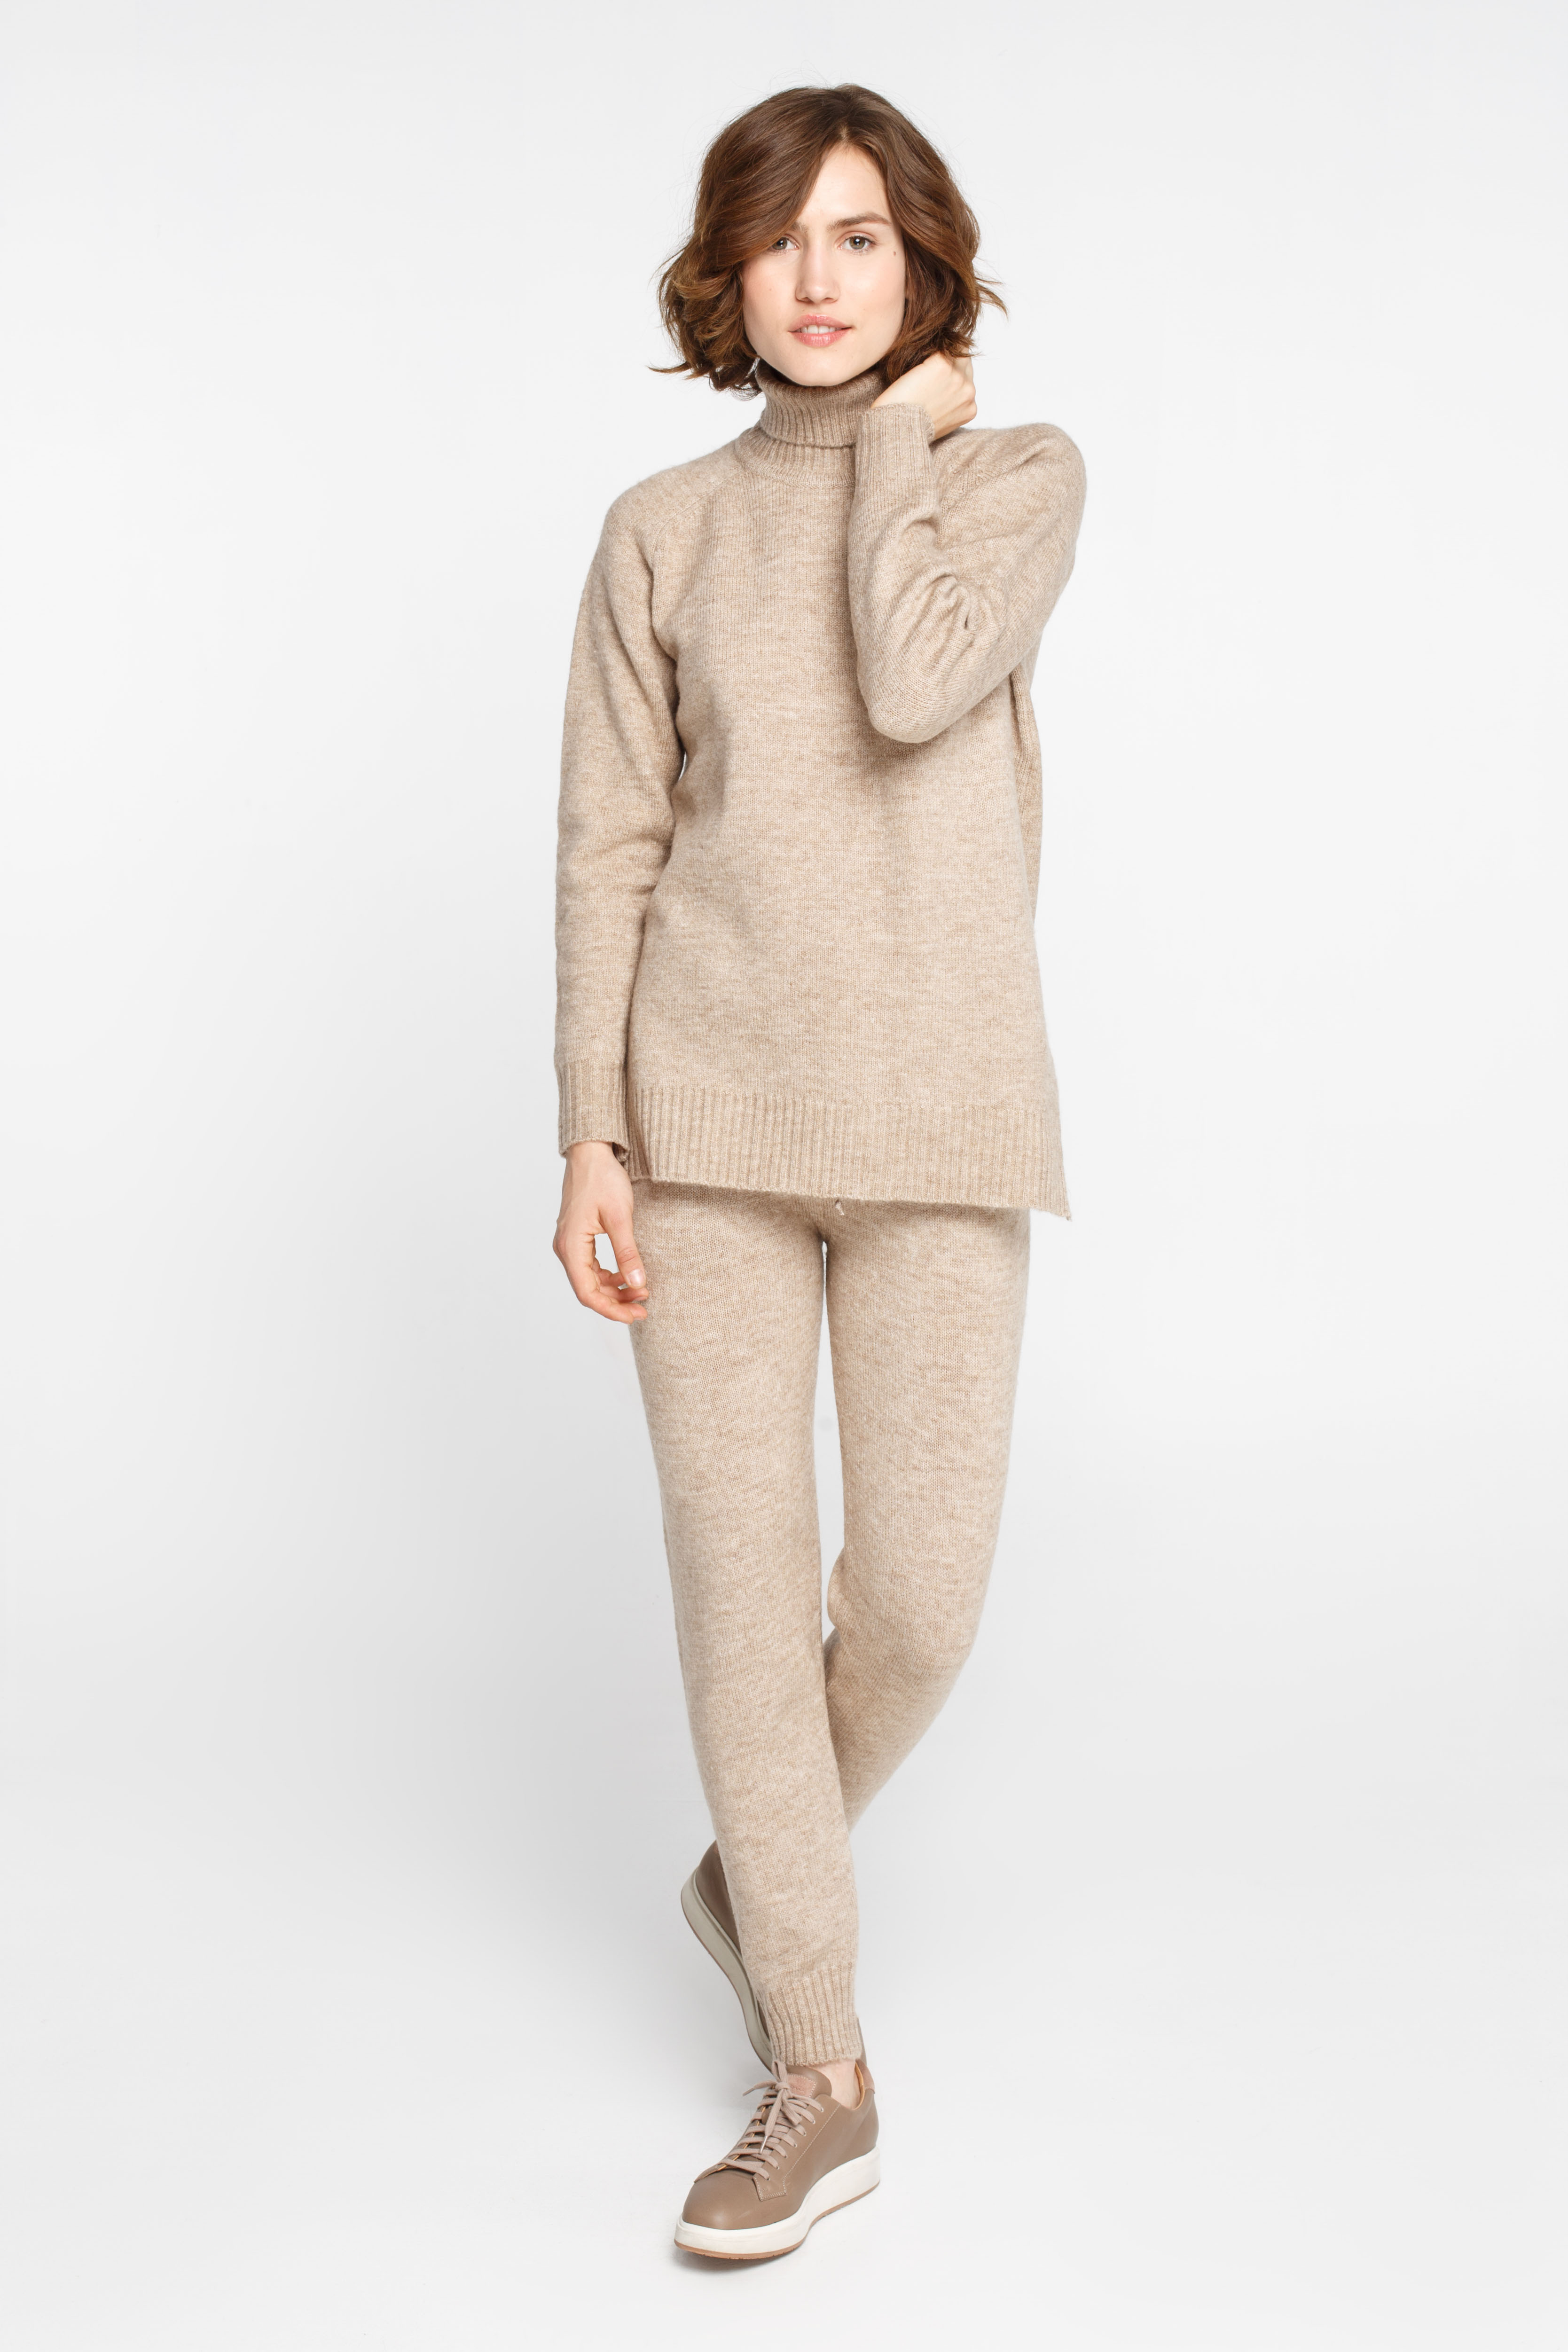 Knit beige jogging pants with wool, photo 2